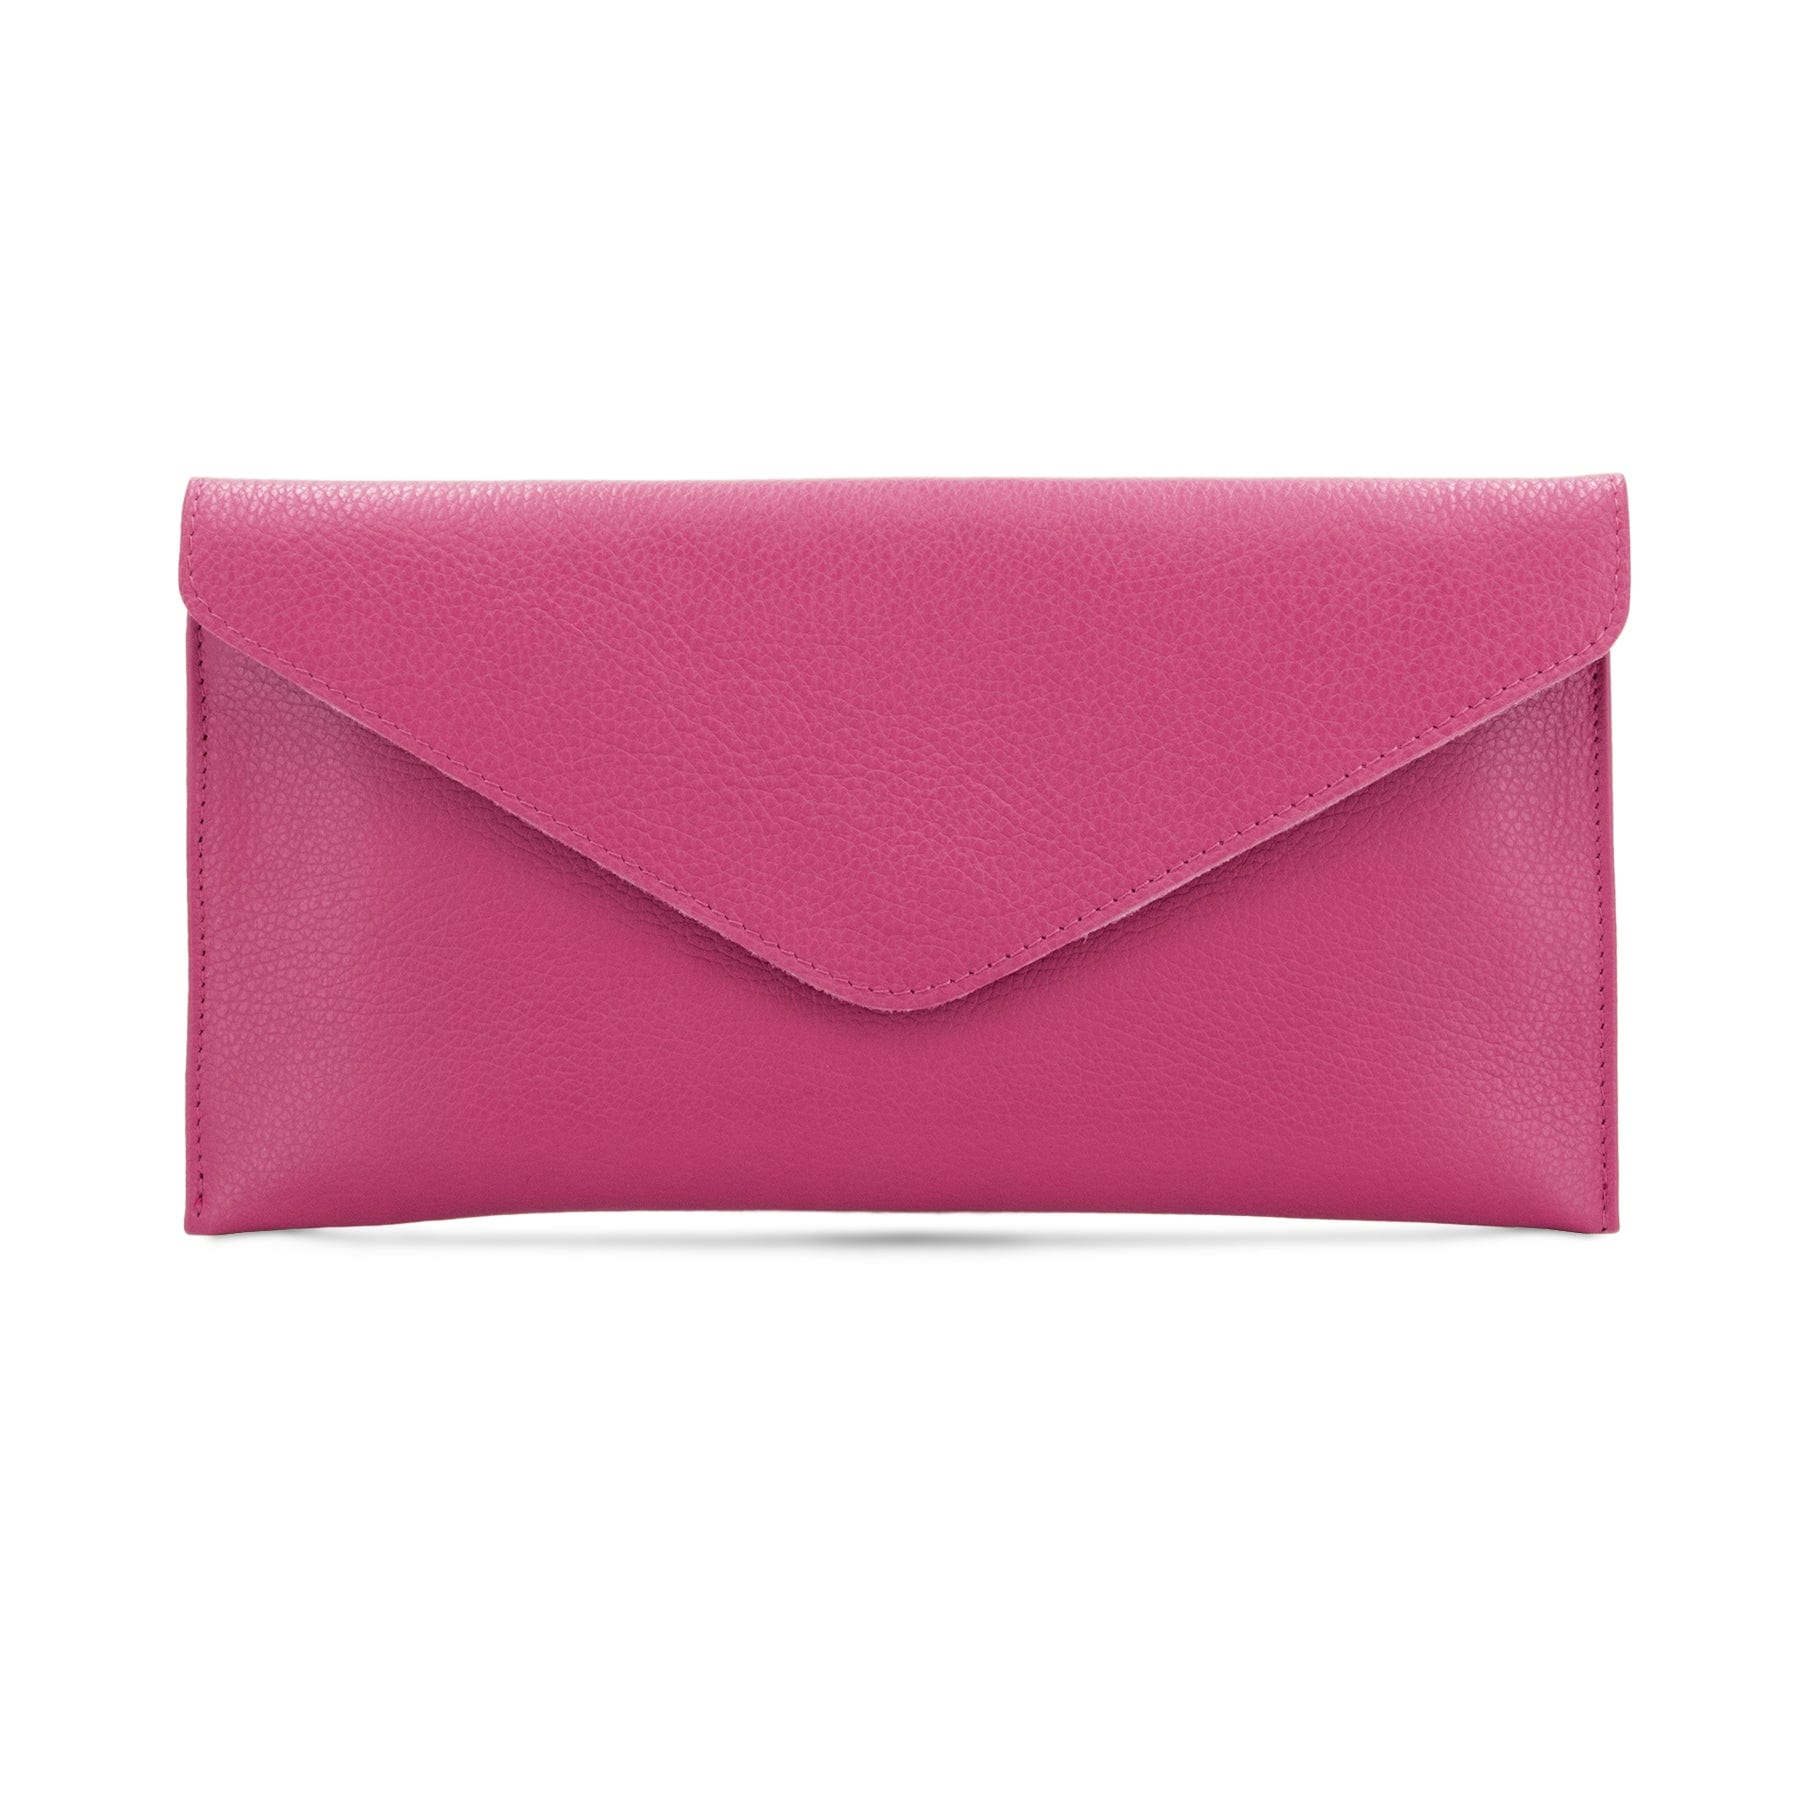 luscious scarves Hot Pink Genuine Italian Leather Envelope Clutch Bag , 10 Colours Available